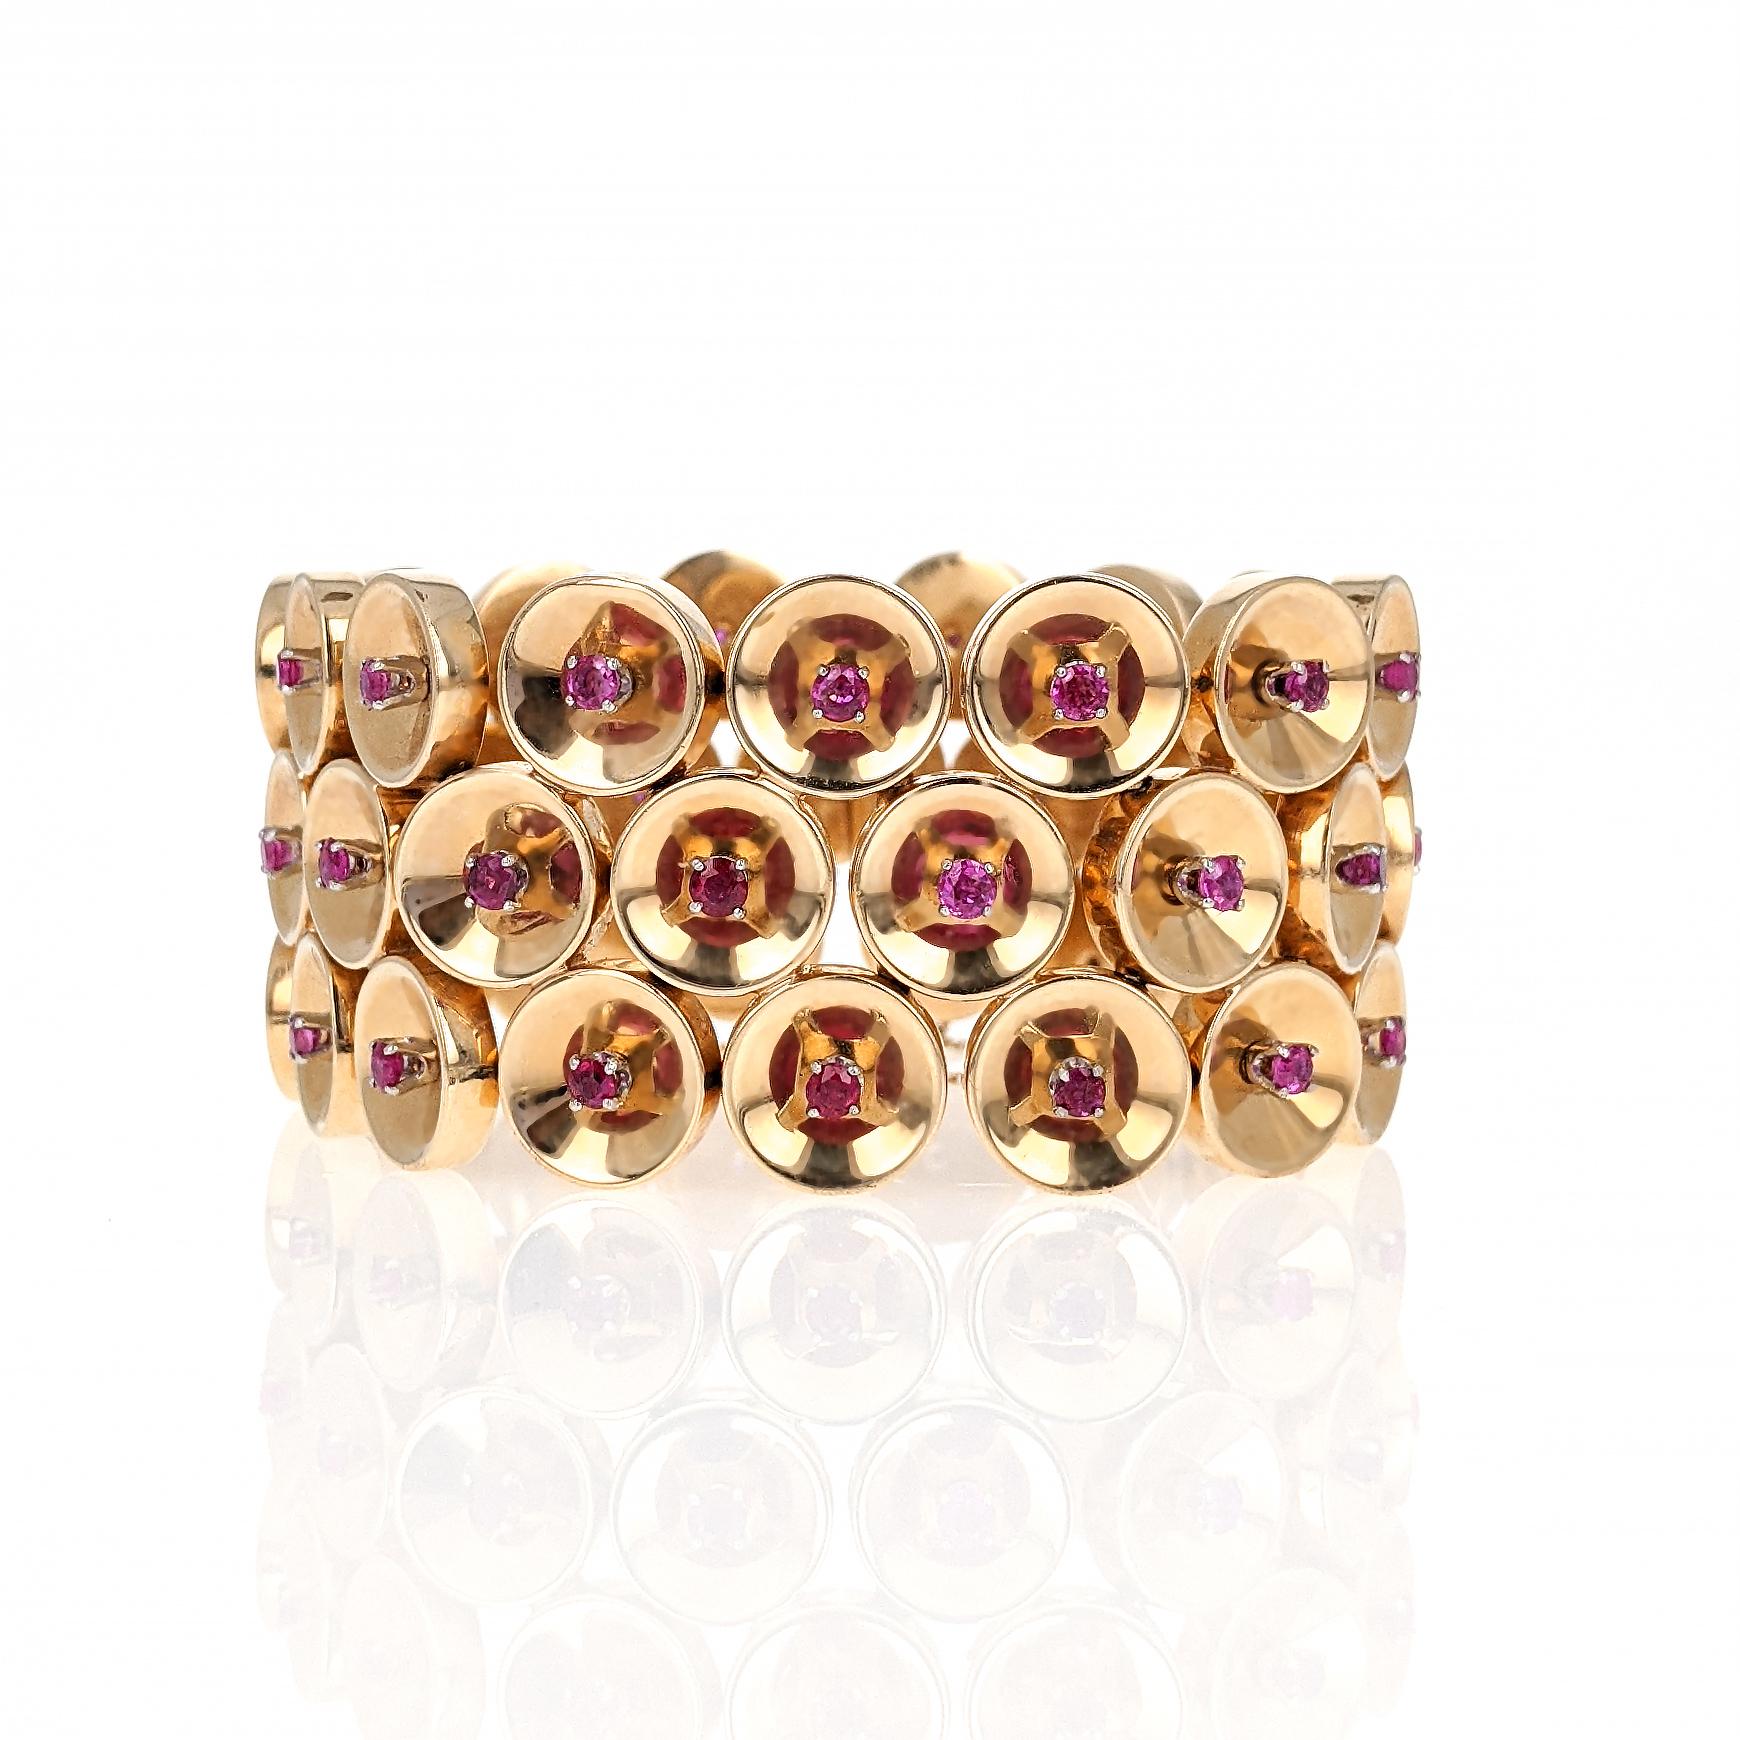 This Retro 1940s bracelet is designed as three rows of connecting disc links, each centering on a round-cut ruby. The discs are concave and create a cool optical effect by reflecting the ruby and prong setting.   The links are well constructed,